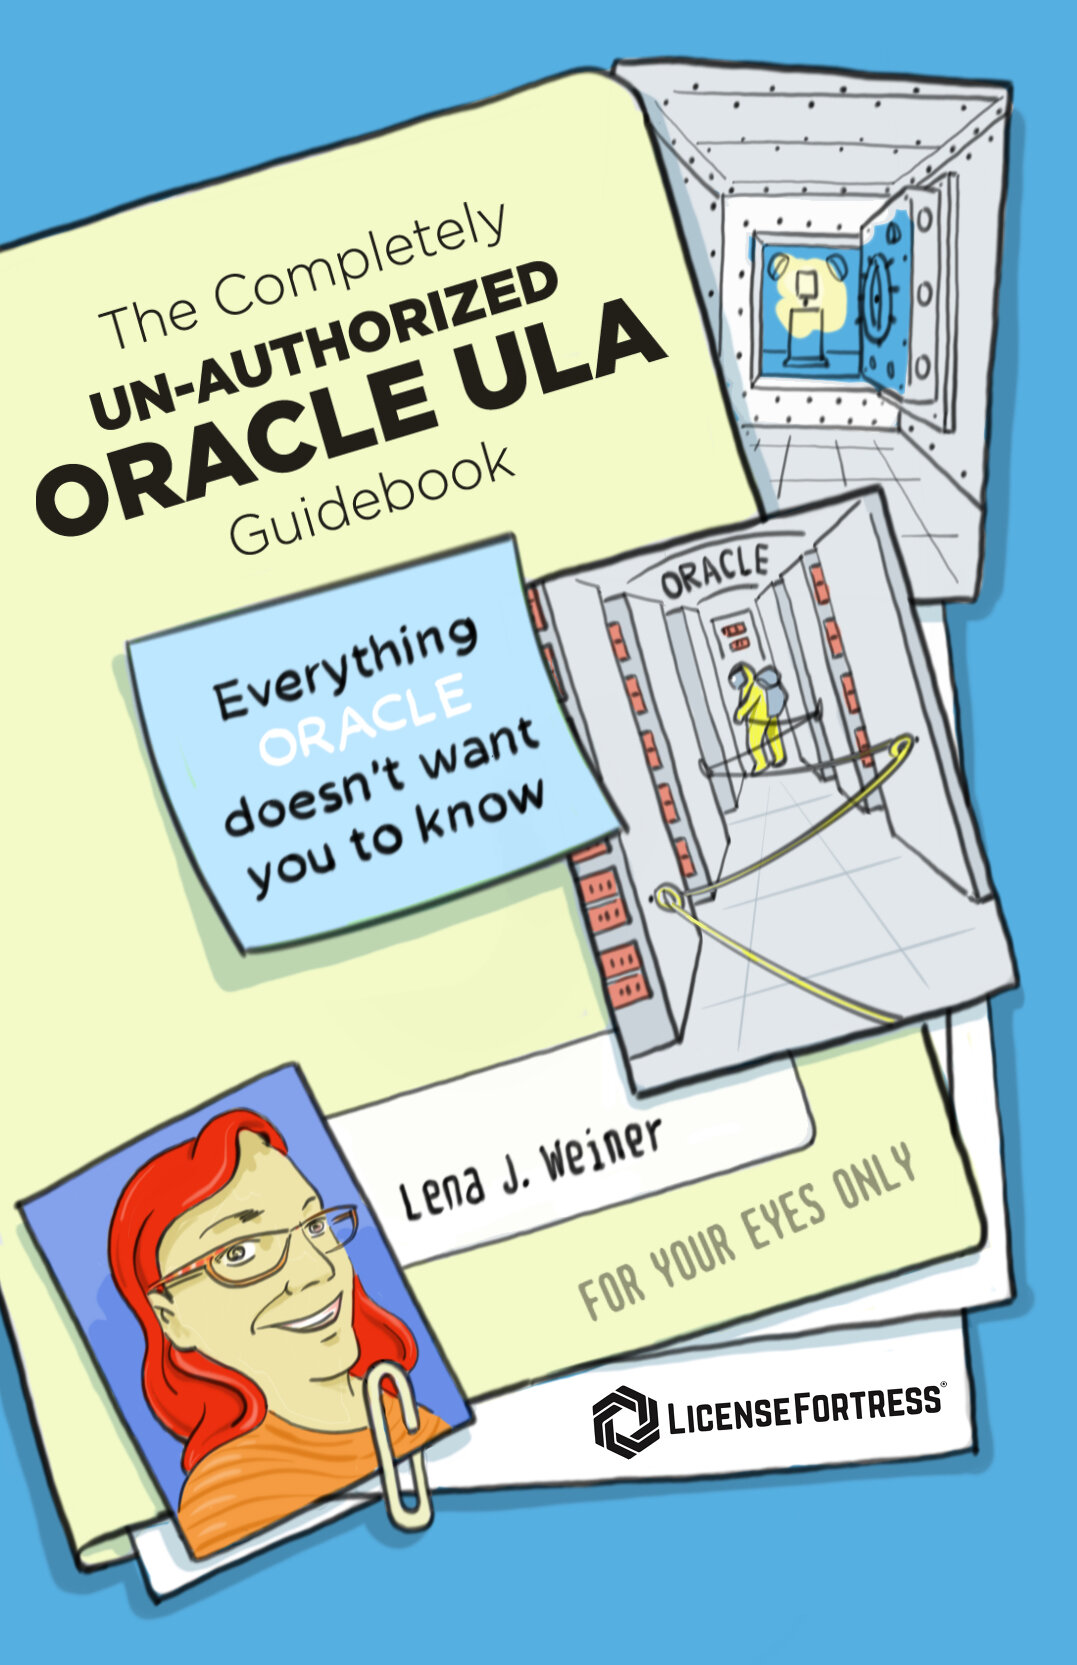 The Completely Un Authorized Oracle ULA Guidebook LicenseFortress